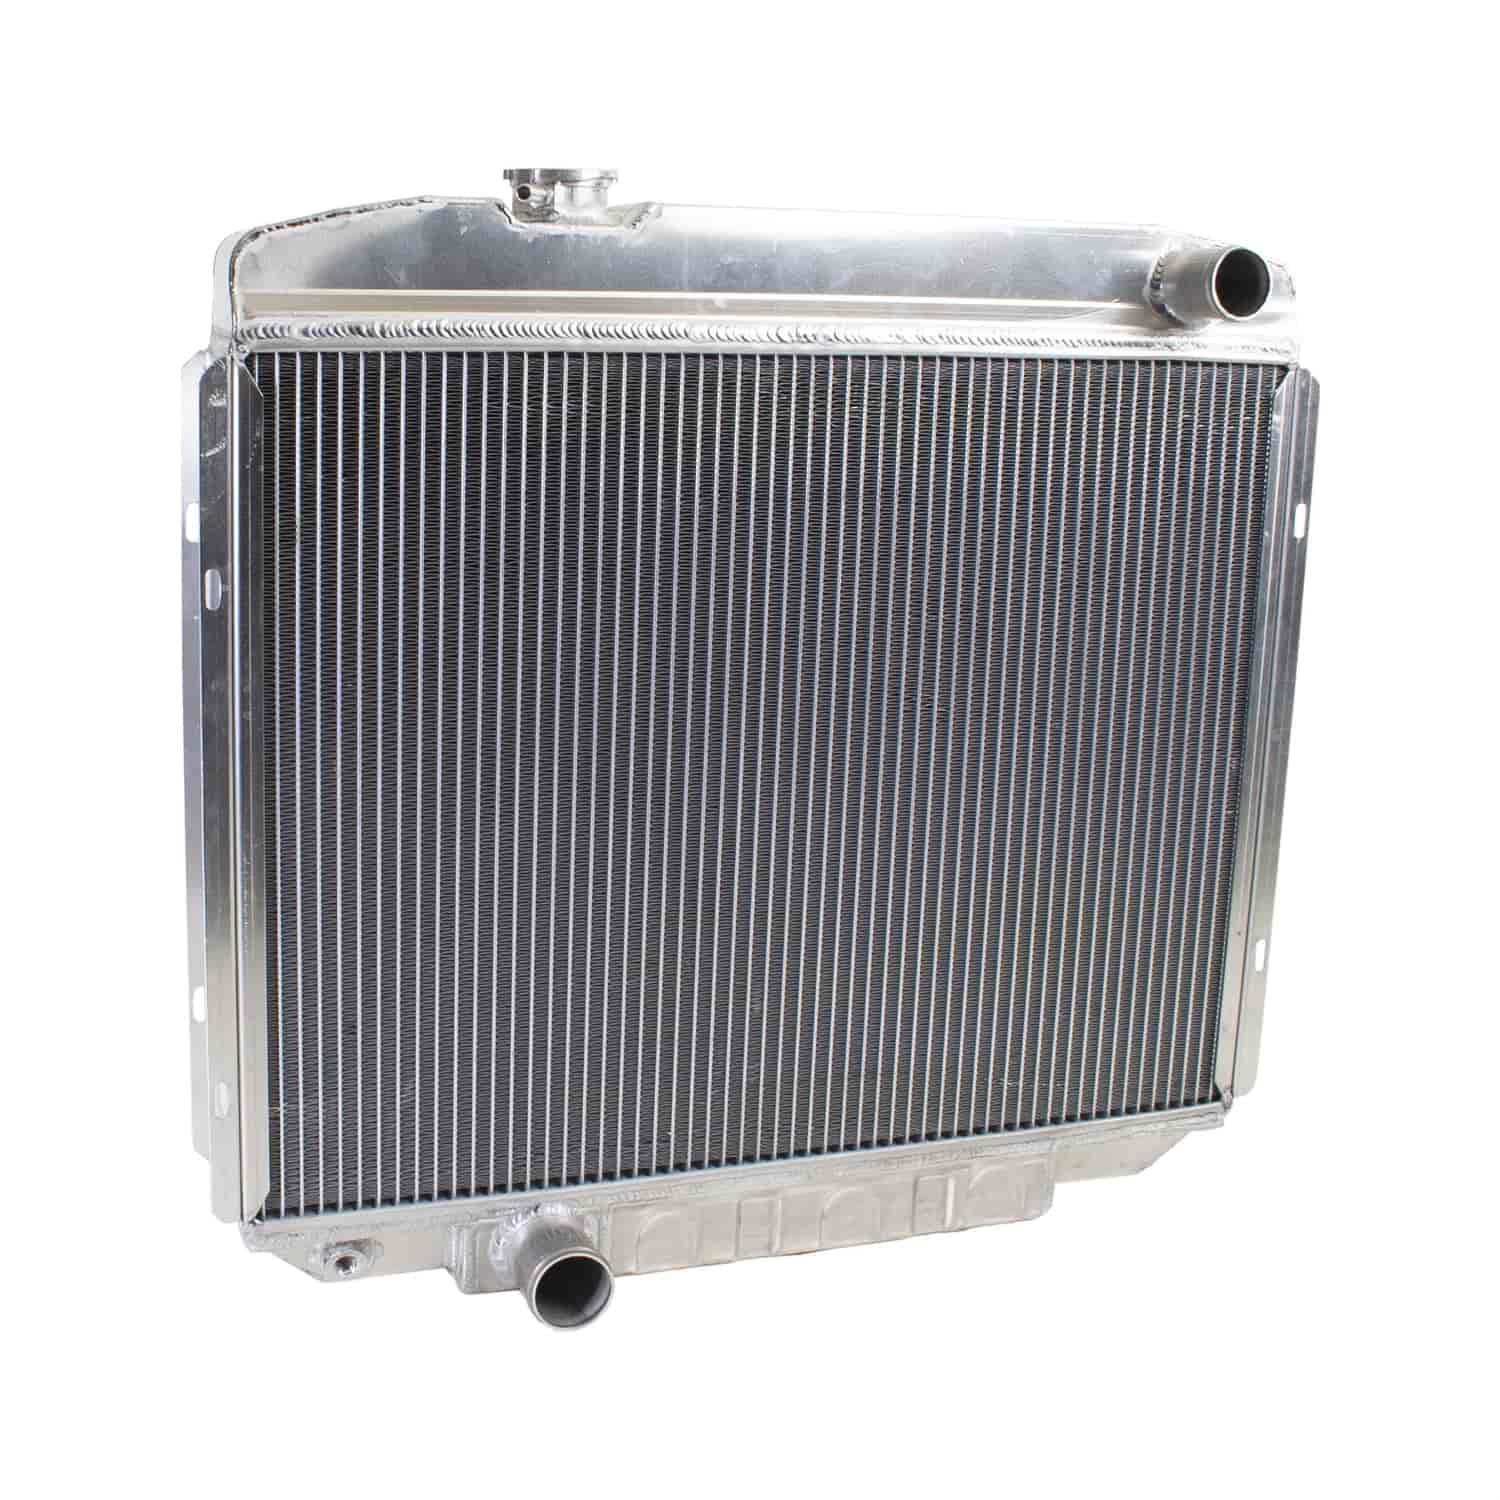 ExactFit Radiator for 1965-1966 Ford Galaxie w/ Late Ford Small Block, Big Block, & FE